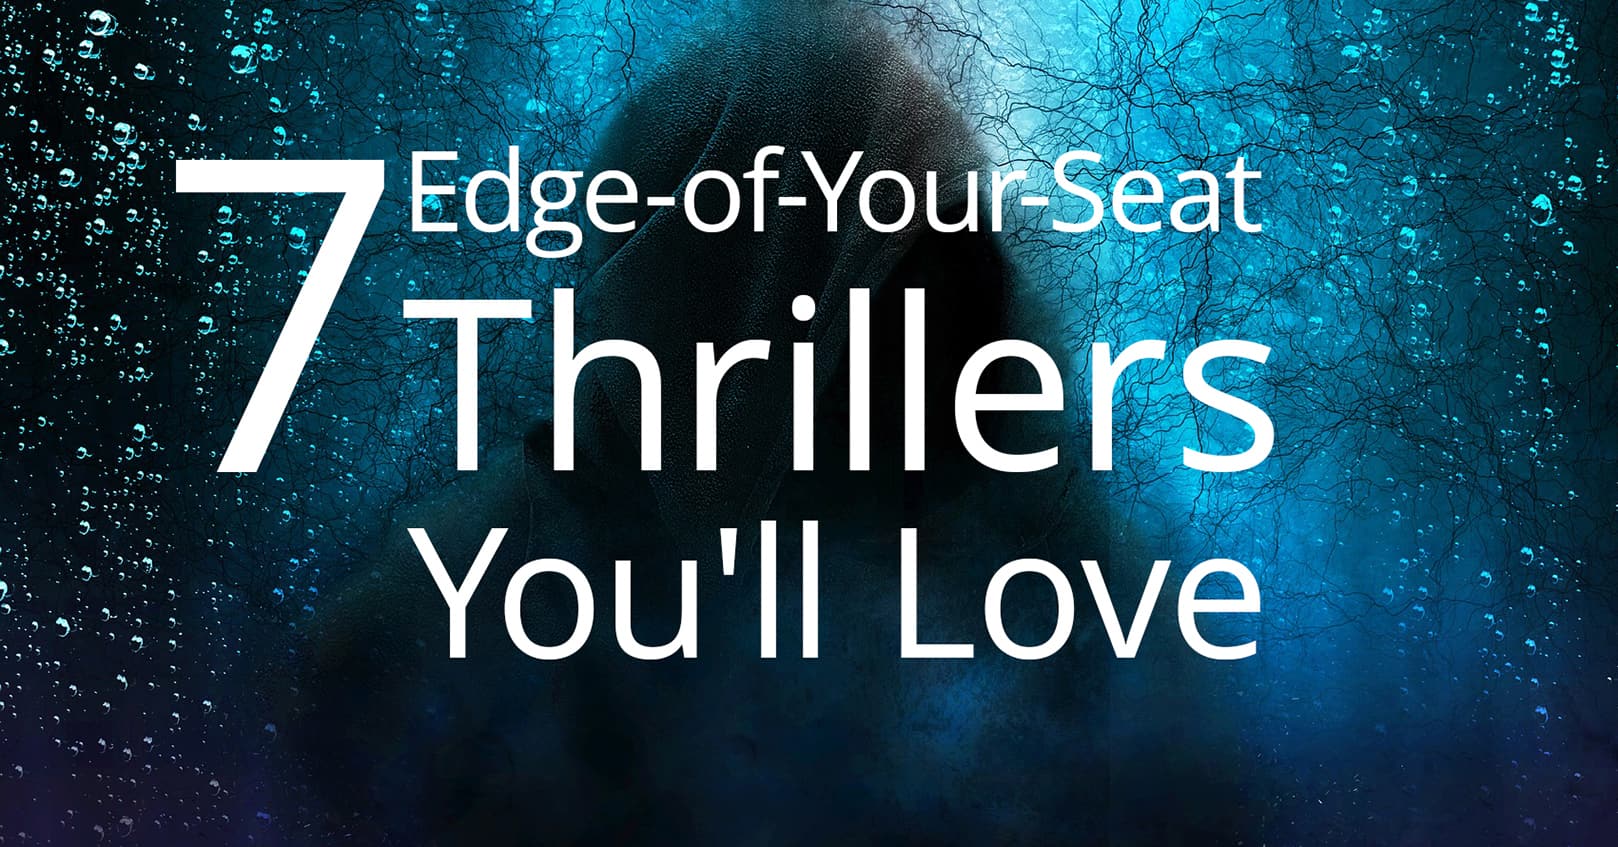 edge-of-your-seat thrillers